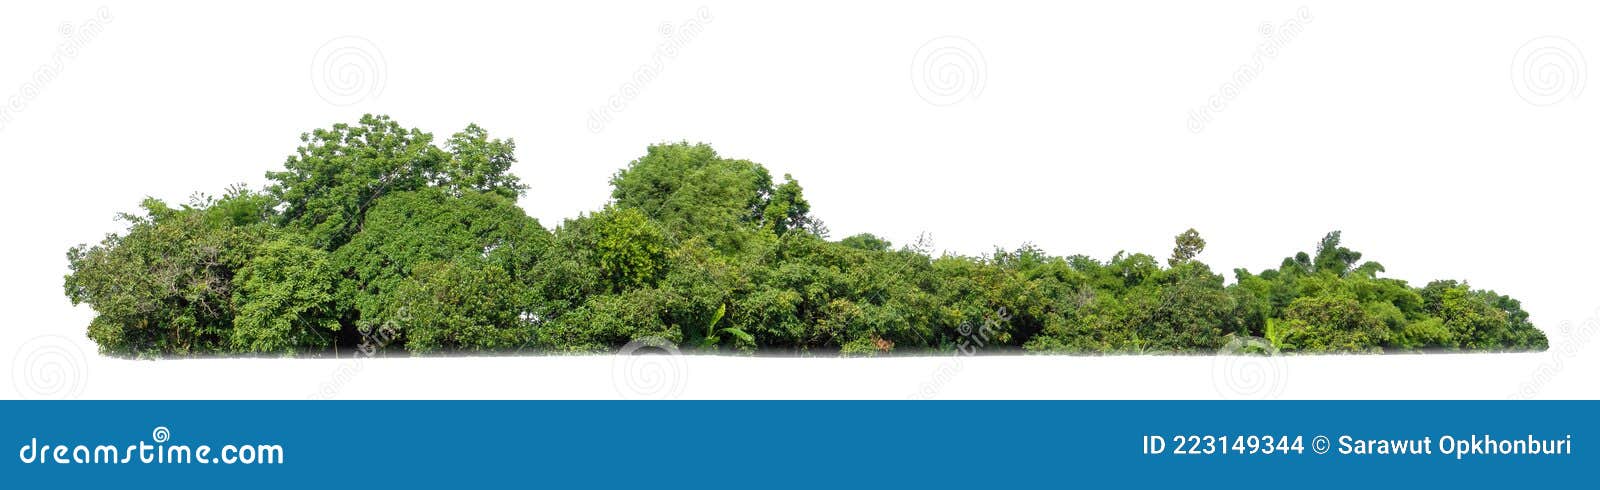 green tree  on white background. forest and leaves in summer rows of trees and bushes